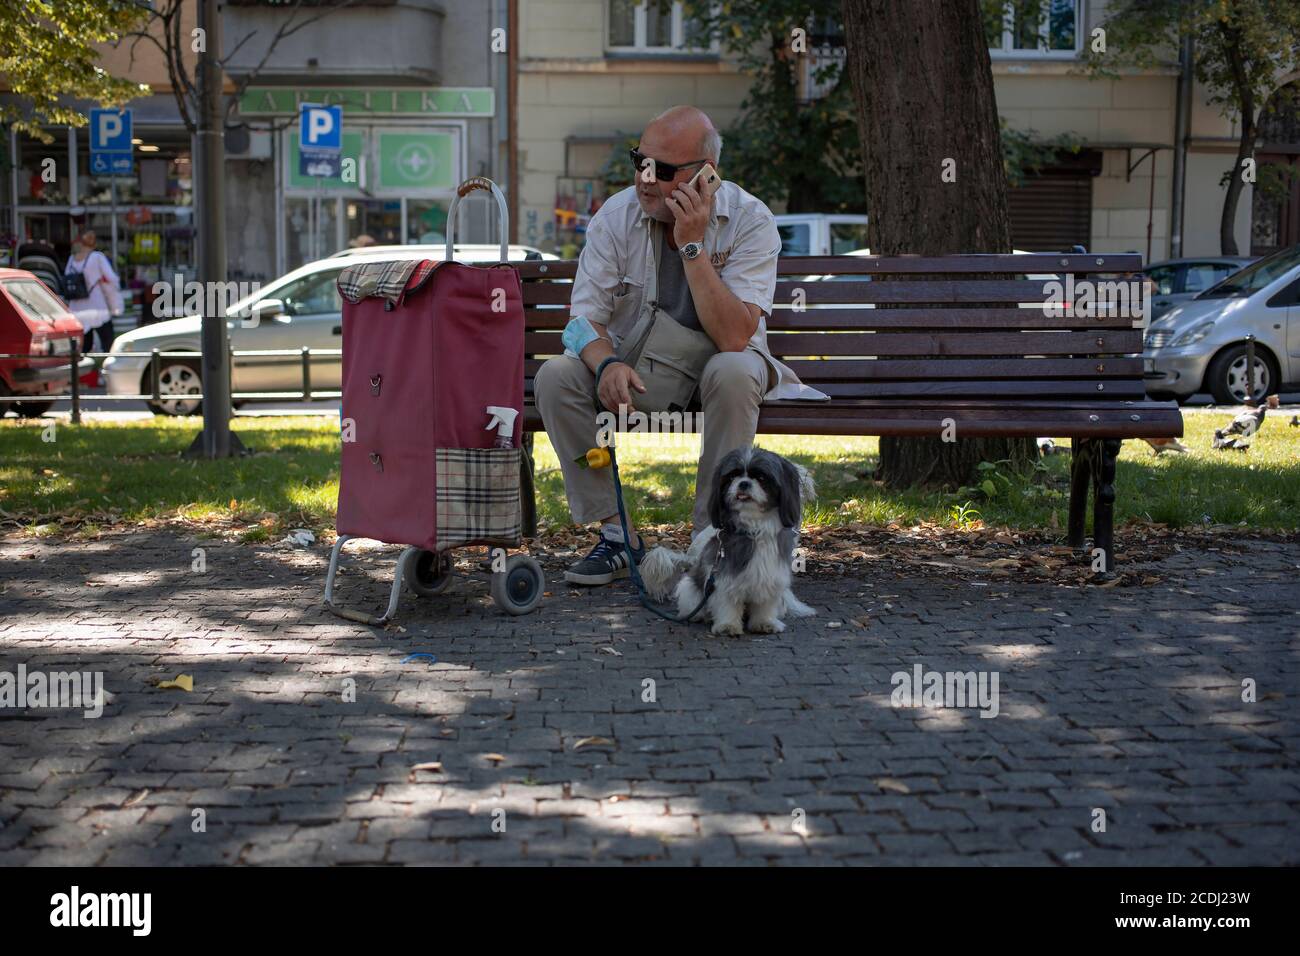 Belgrade, Serbia, Aug 2, 2020: Man with two dogs sitting on a bench in the park Stock Photo